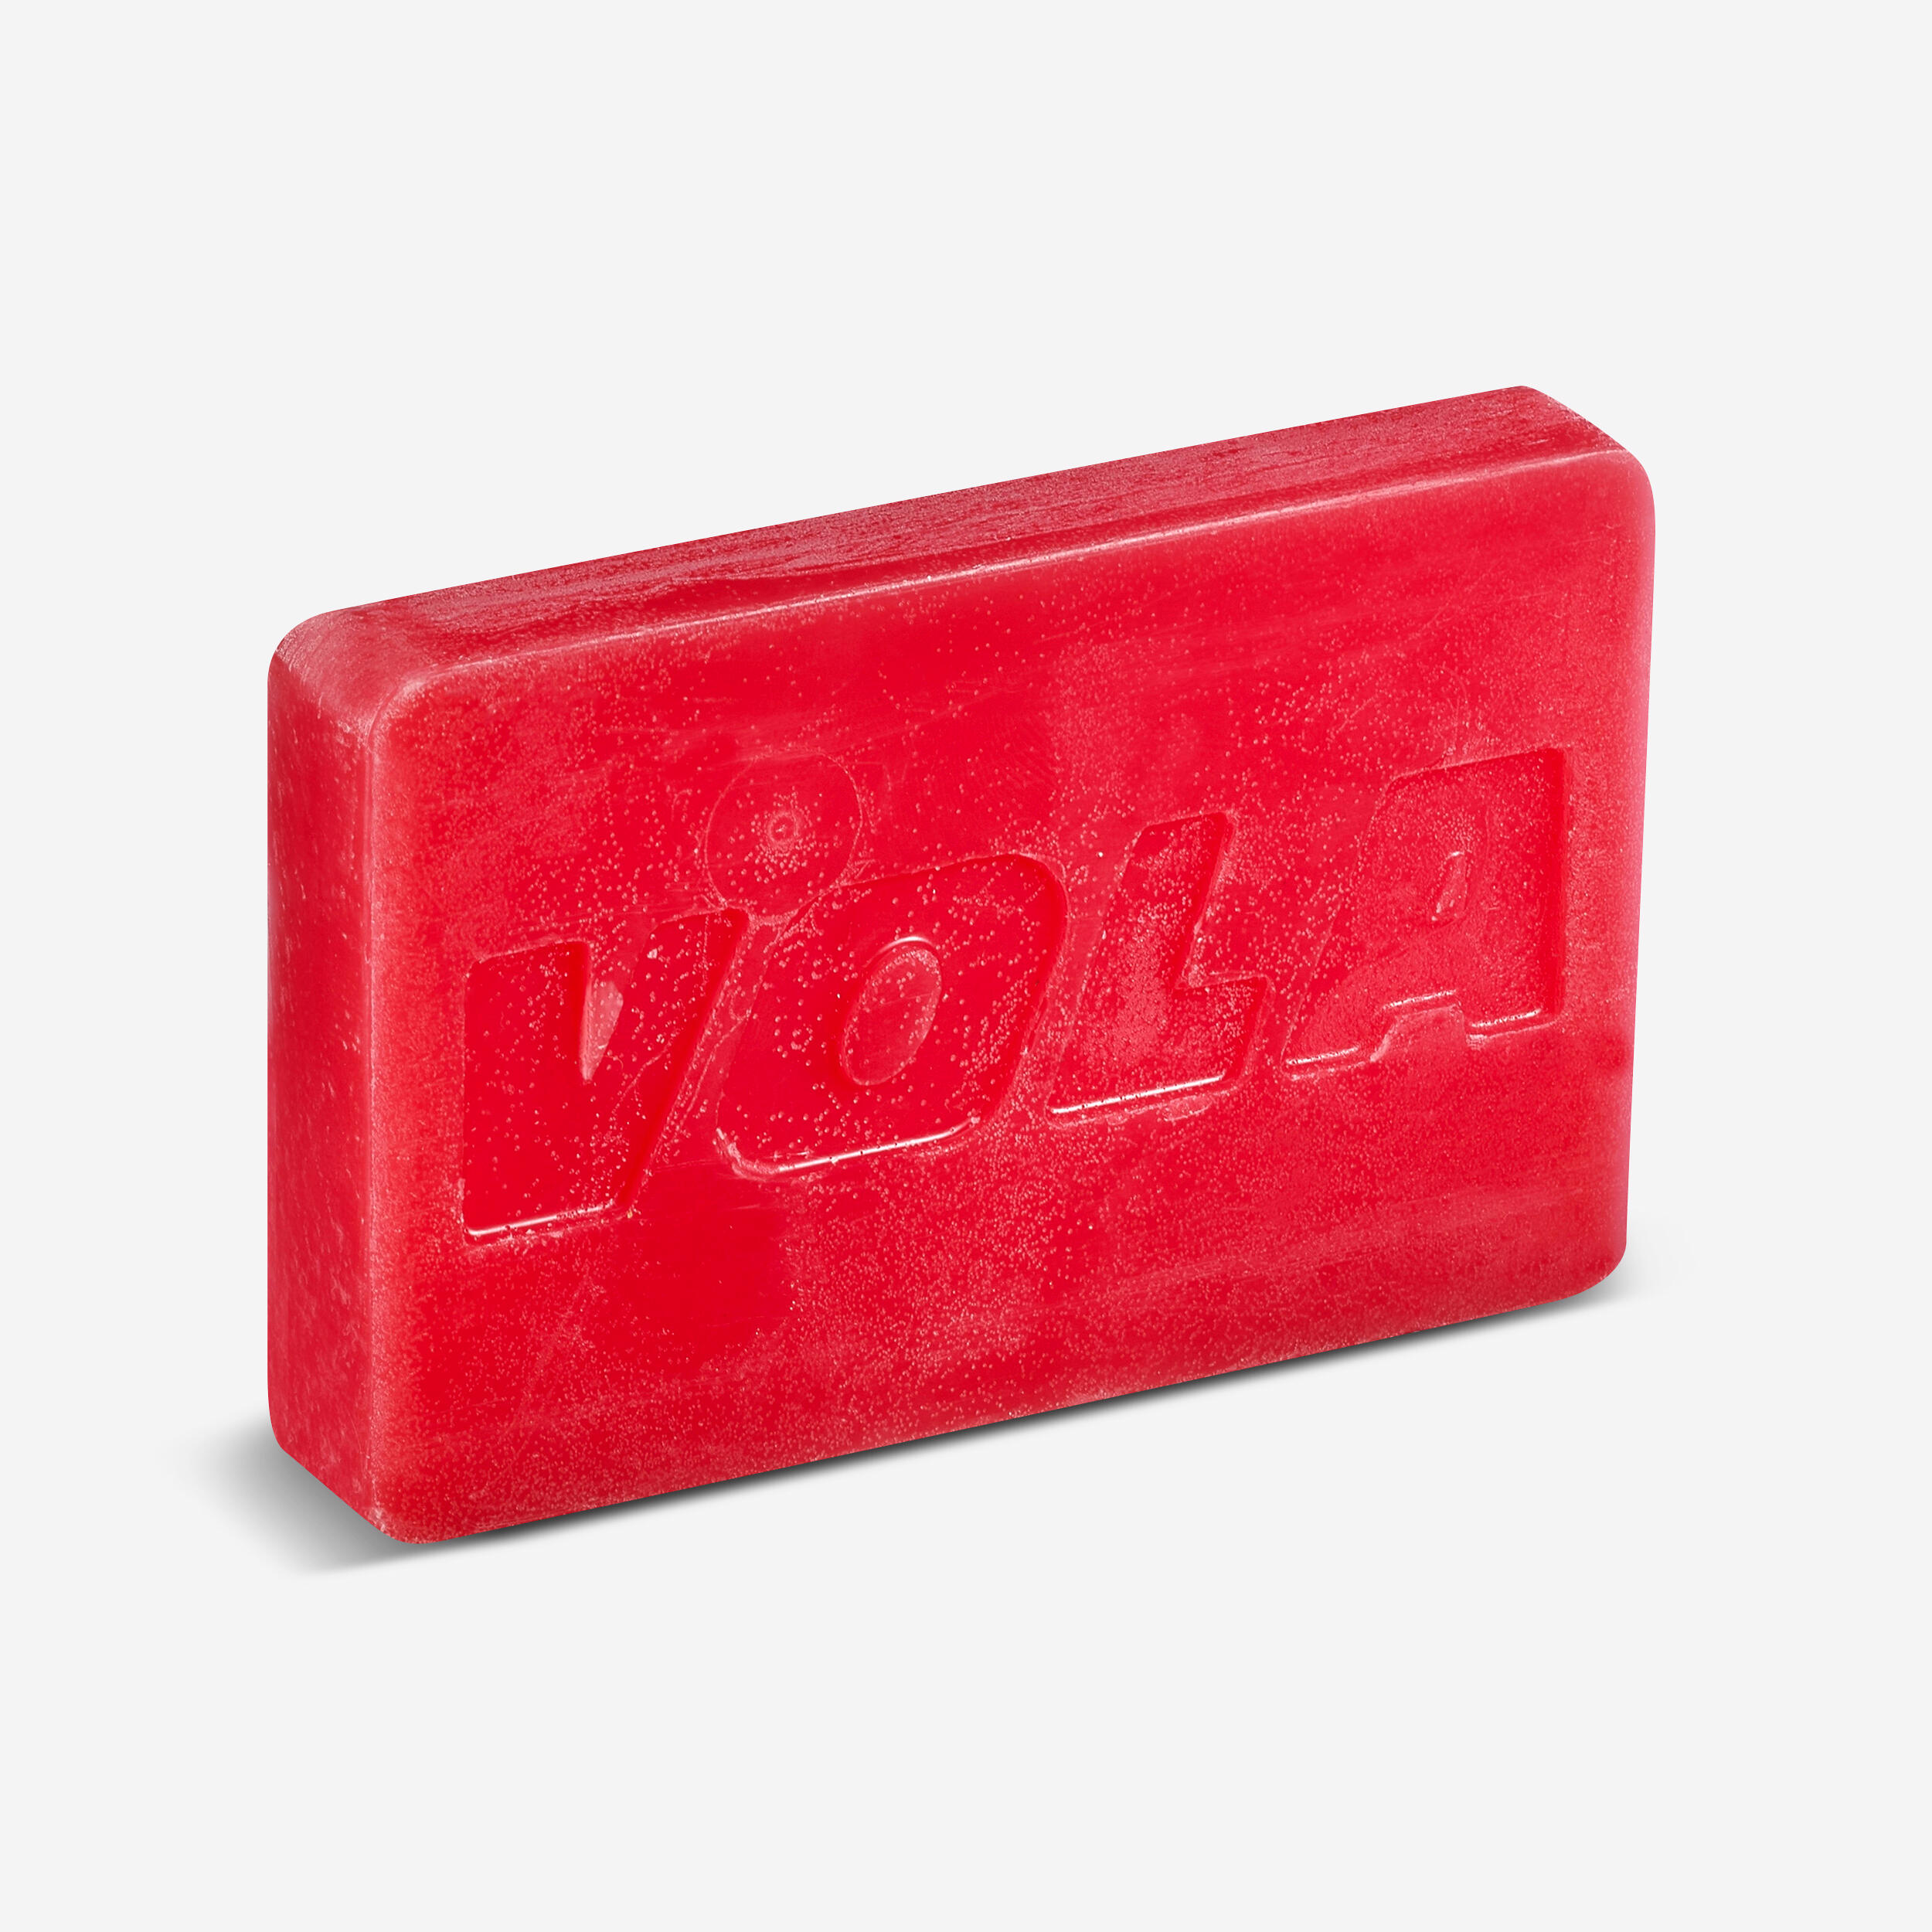 VOLA 110g competition wax for skis/snowboards, all temperatures (-14° / -4°